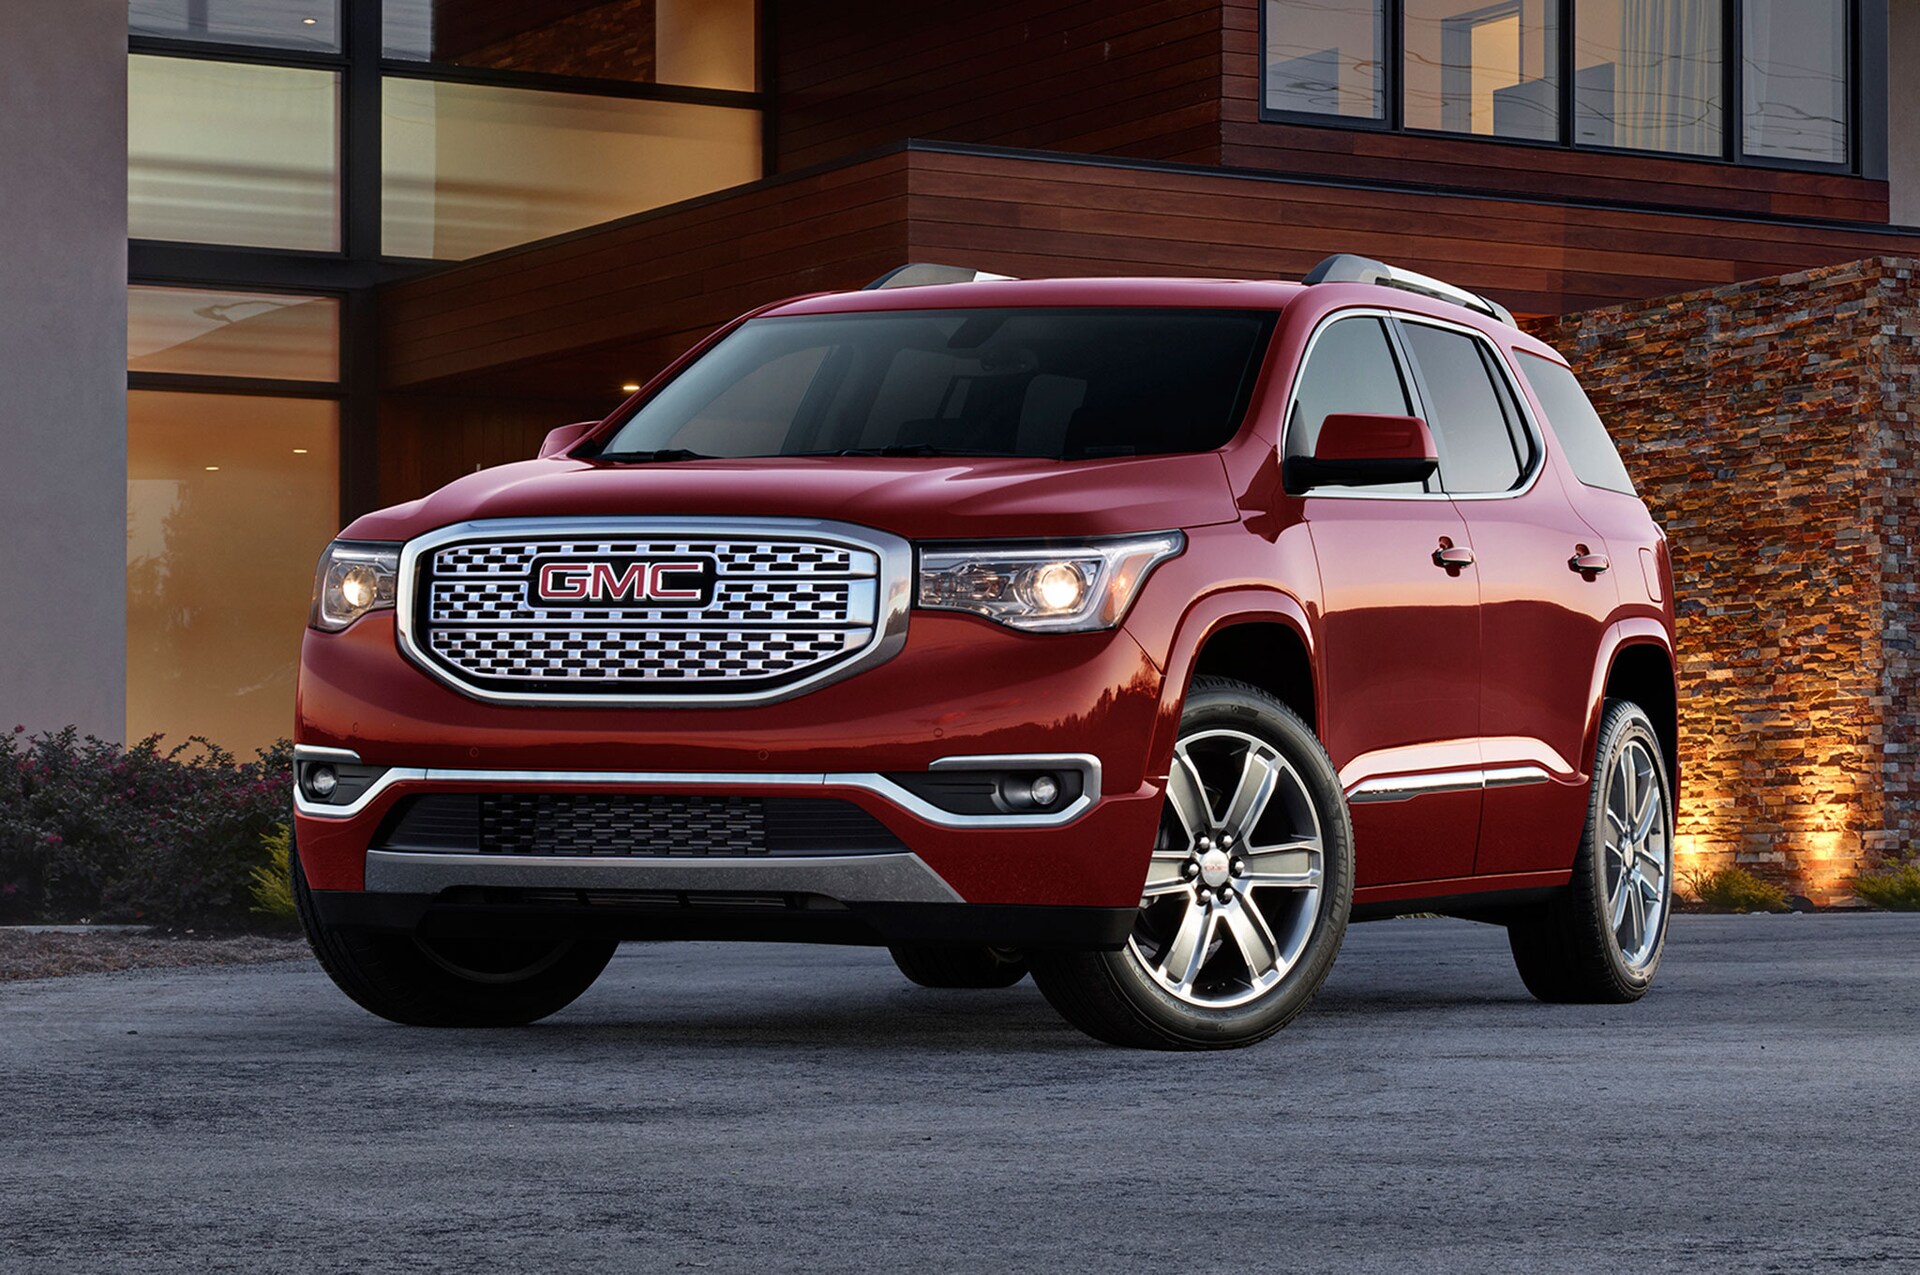 2017 GMC Acadia Priced from $29,995 to $47,845